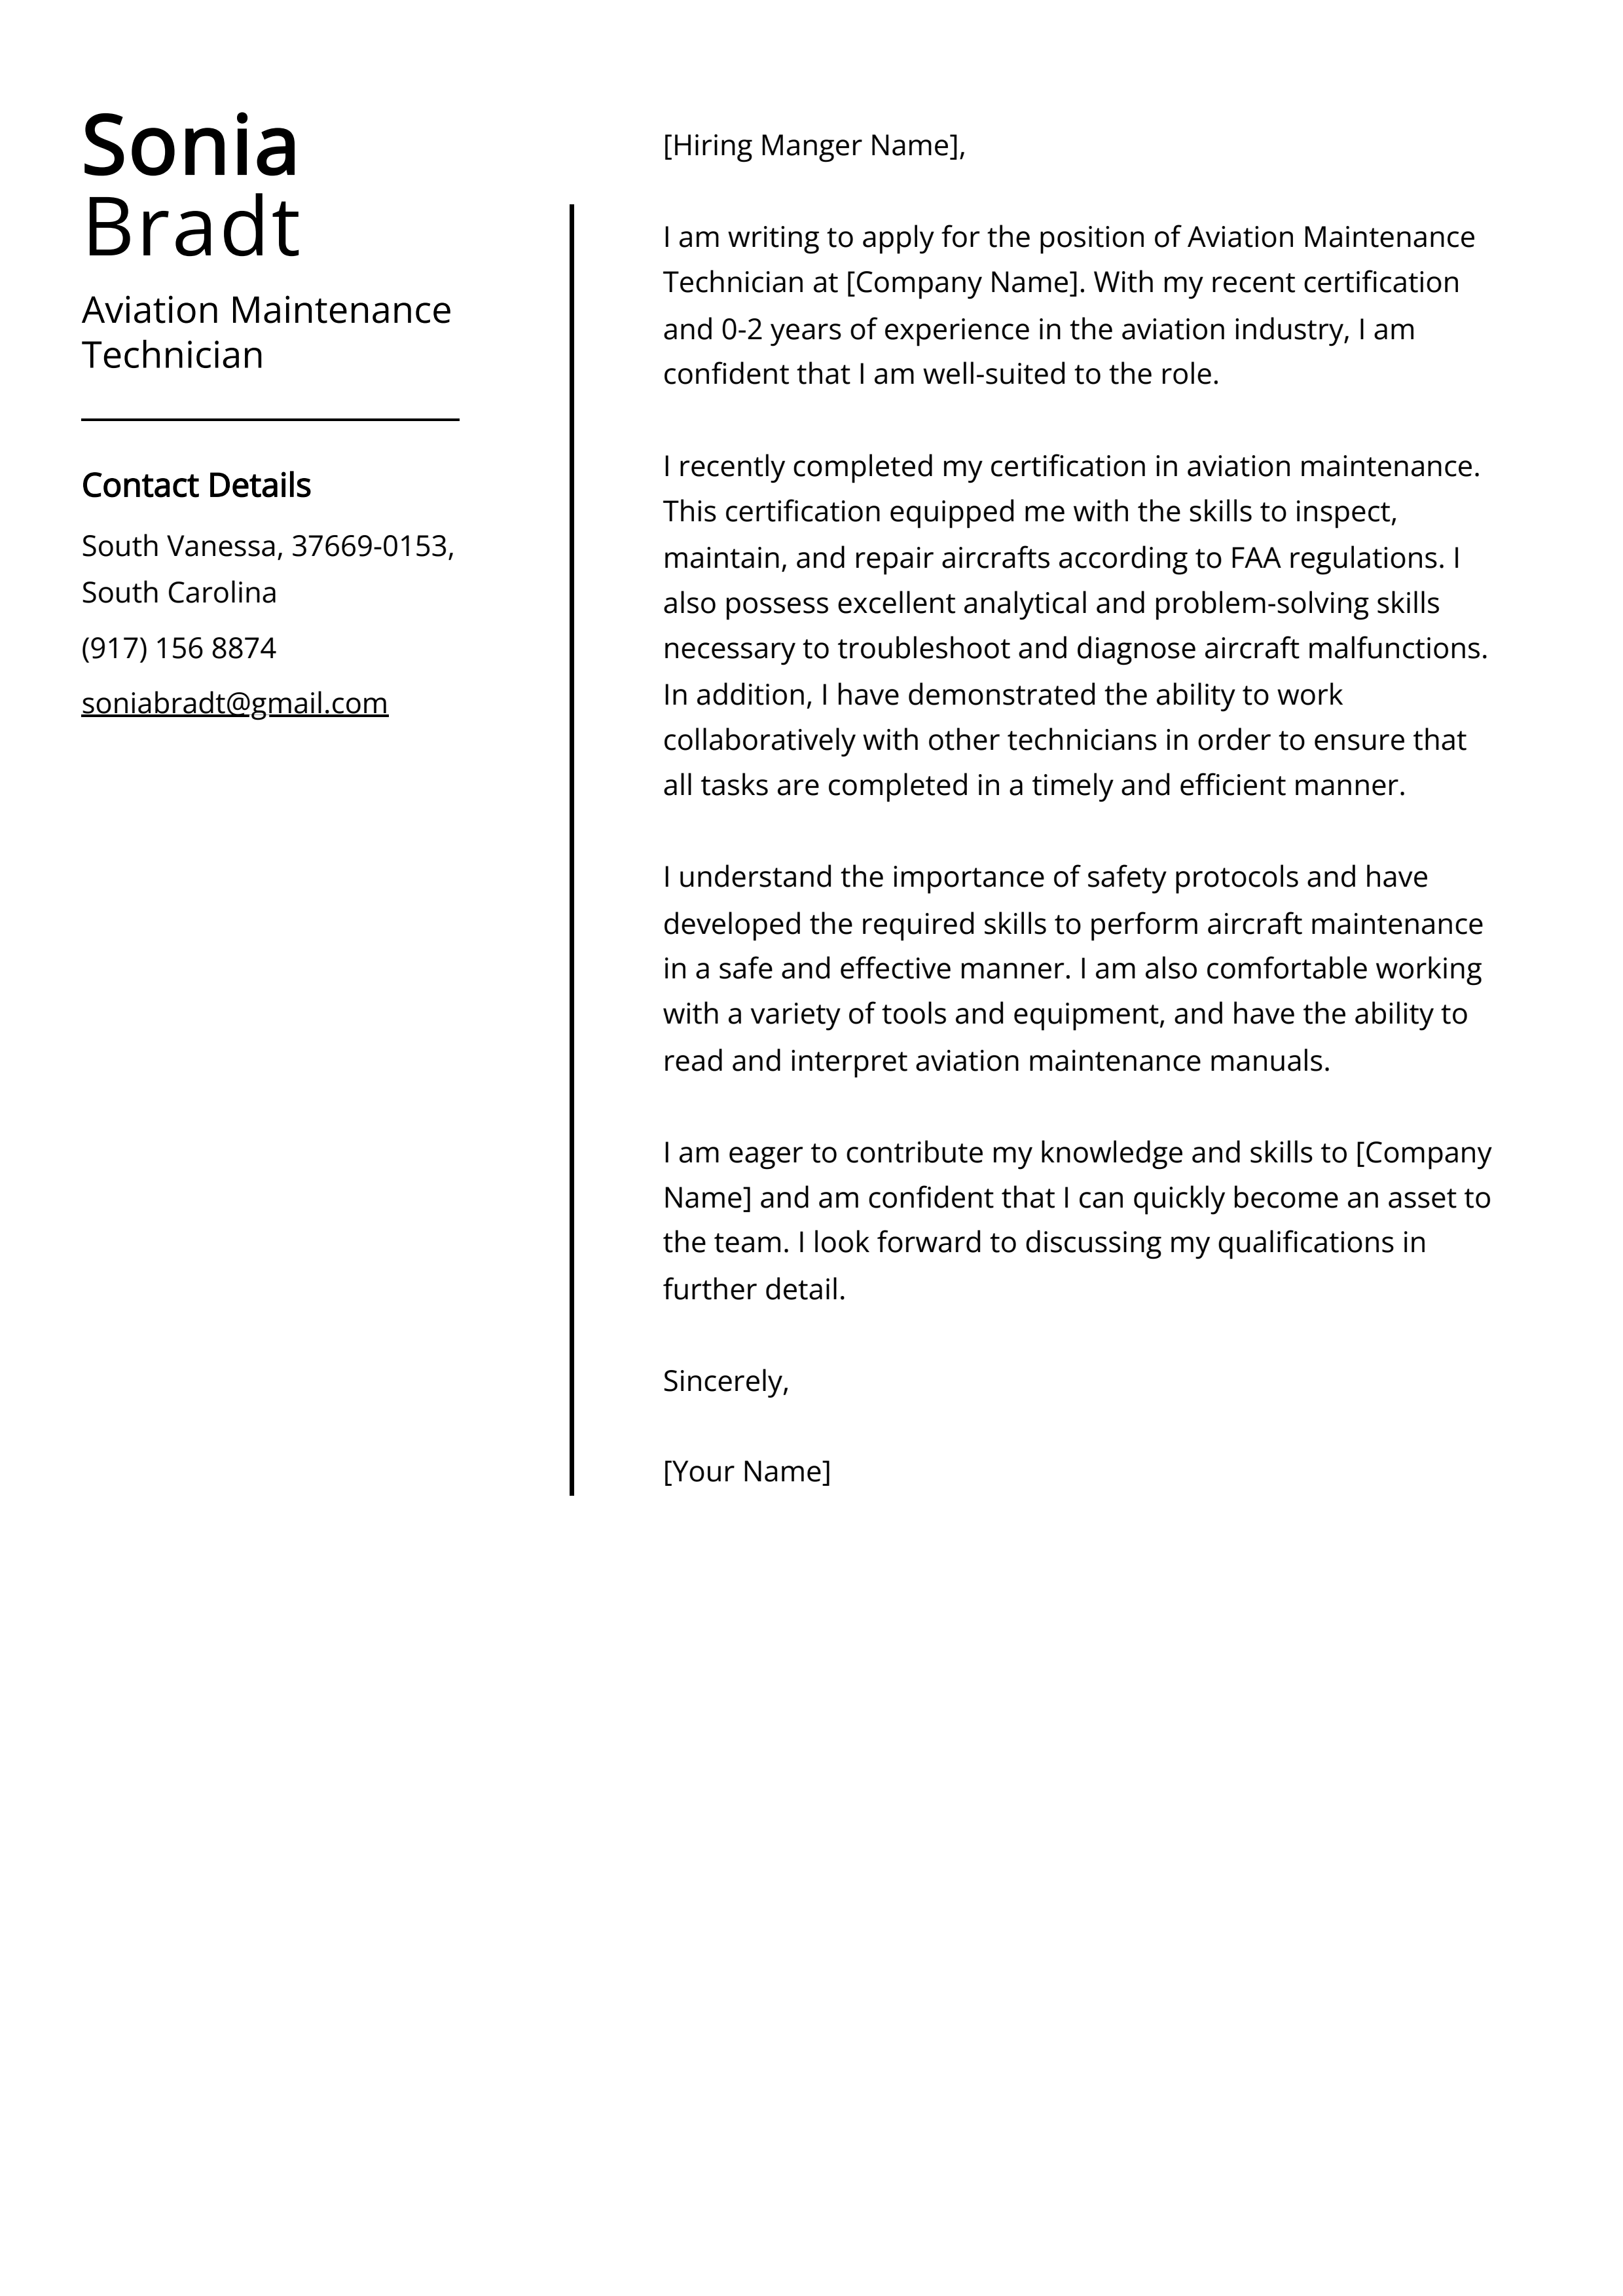 Aviation Maintenance Technician Cover Letter Example